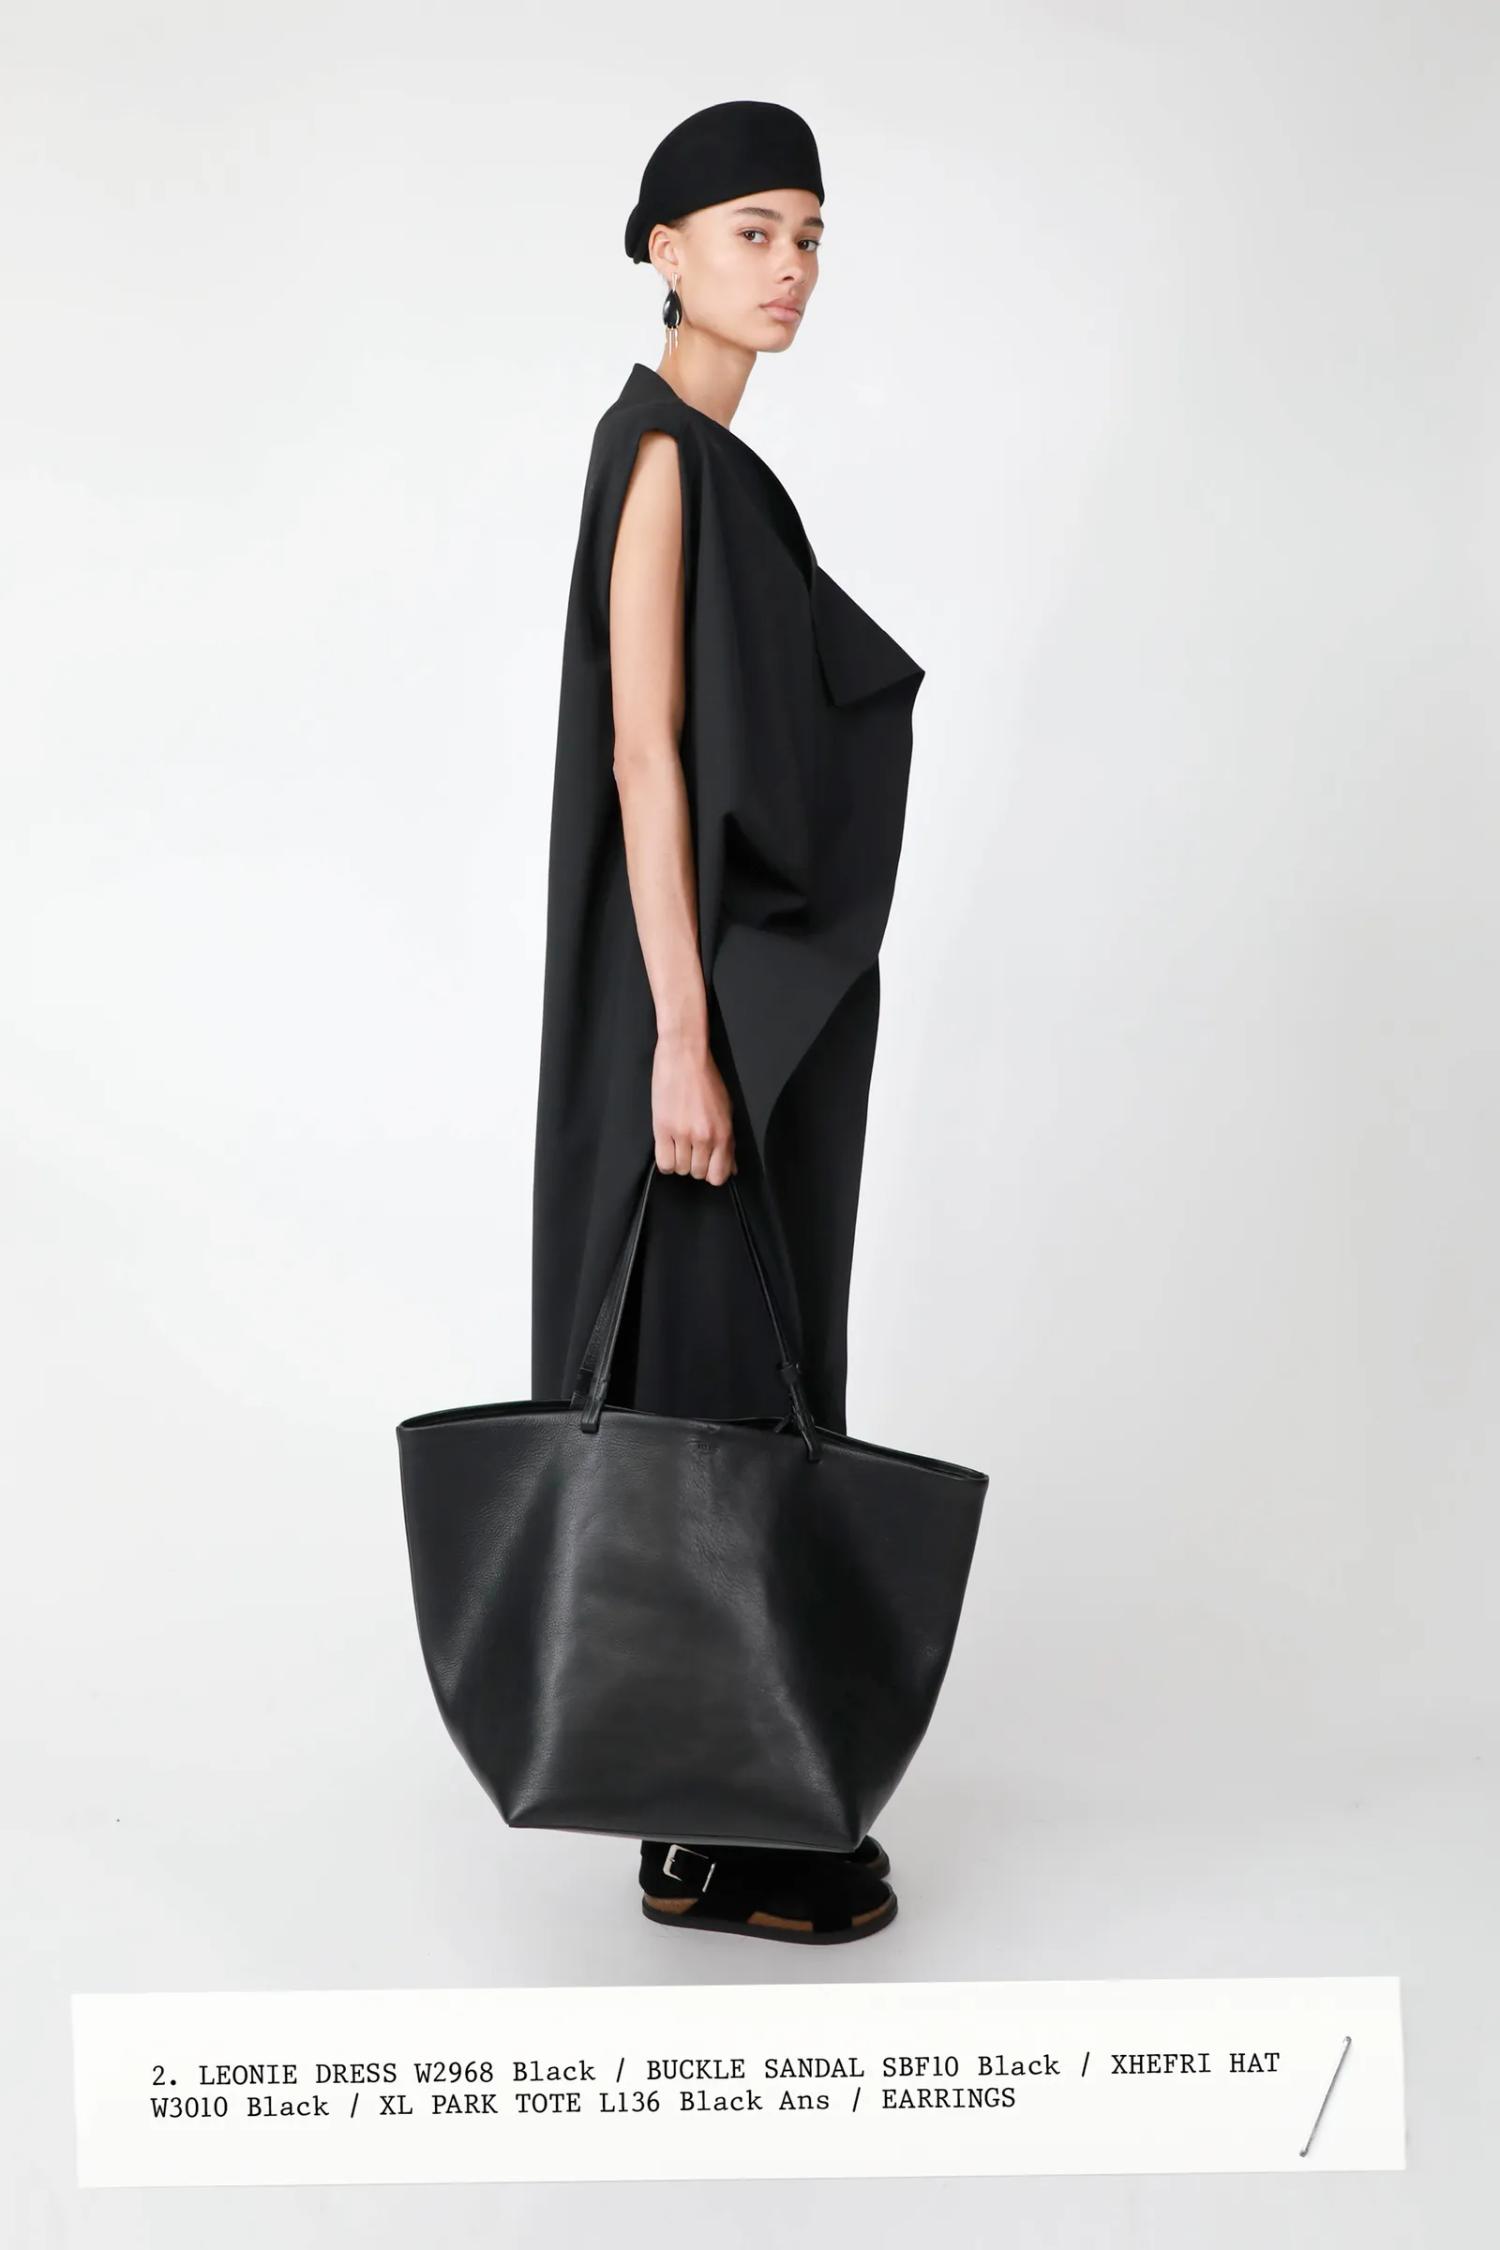 Black Dress Tote Bag Outfit